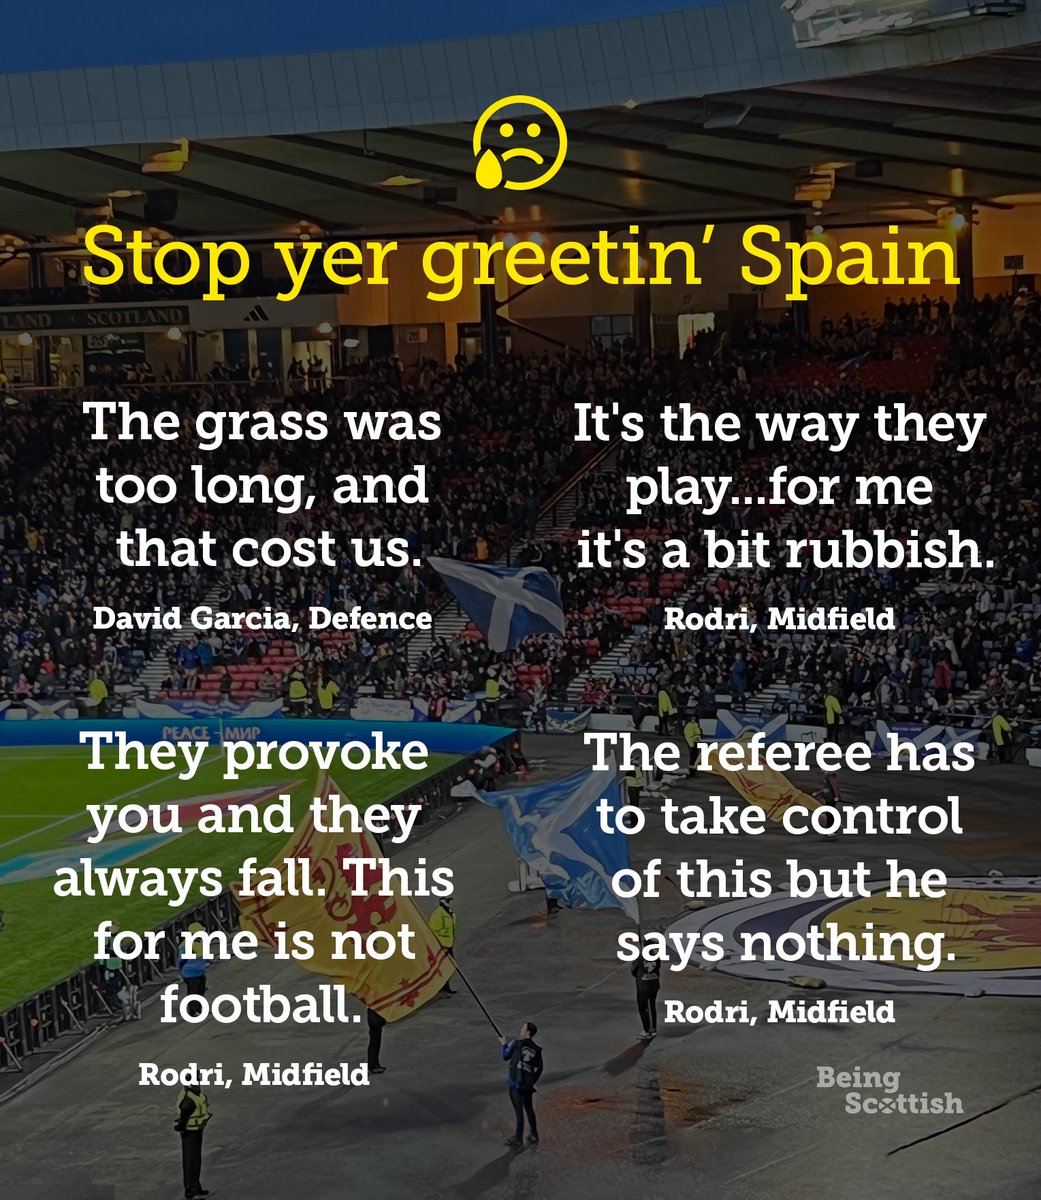 It's not easy getting a pumpin from wee Scotland if you're a big team. 'The grass was too long' 😆 #SCOESP